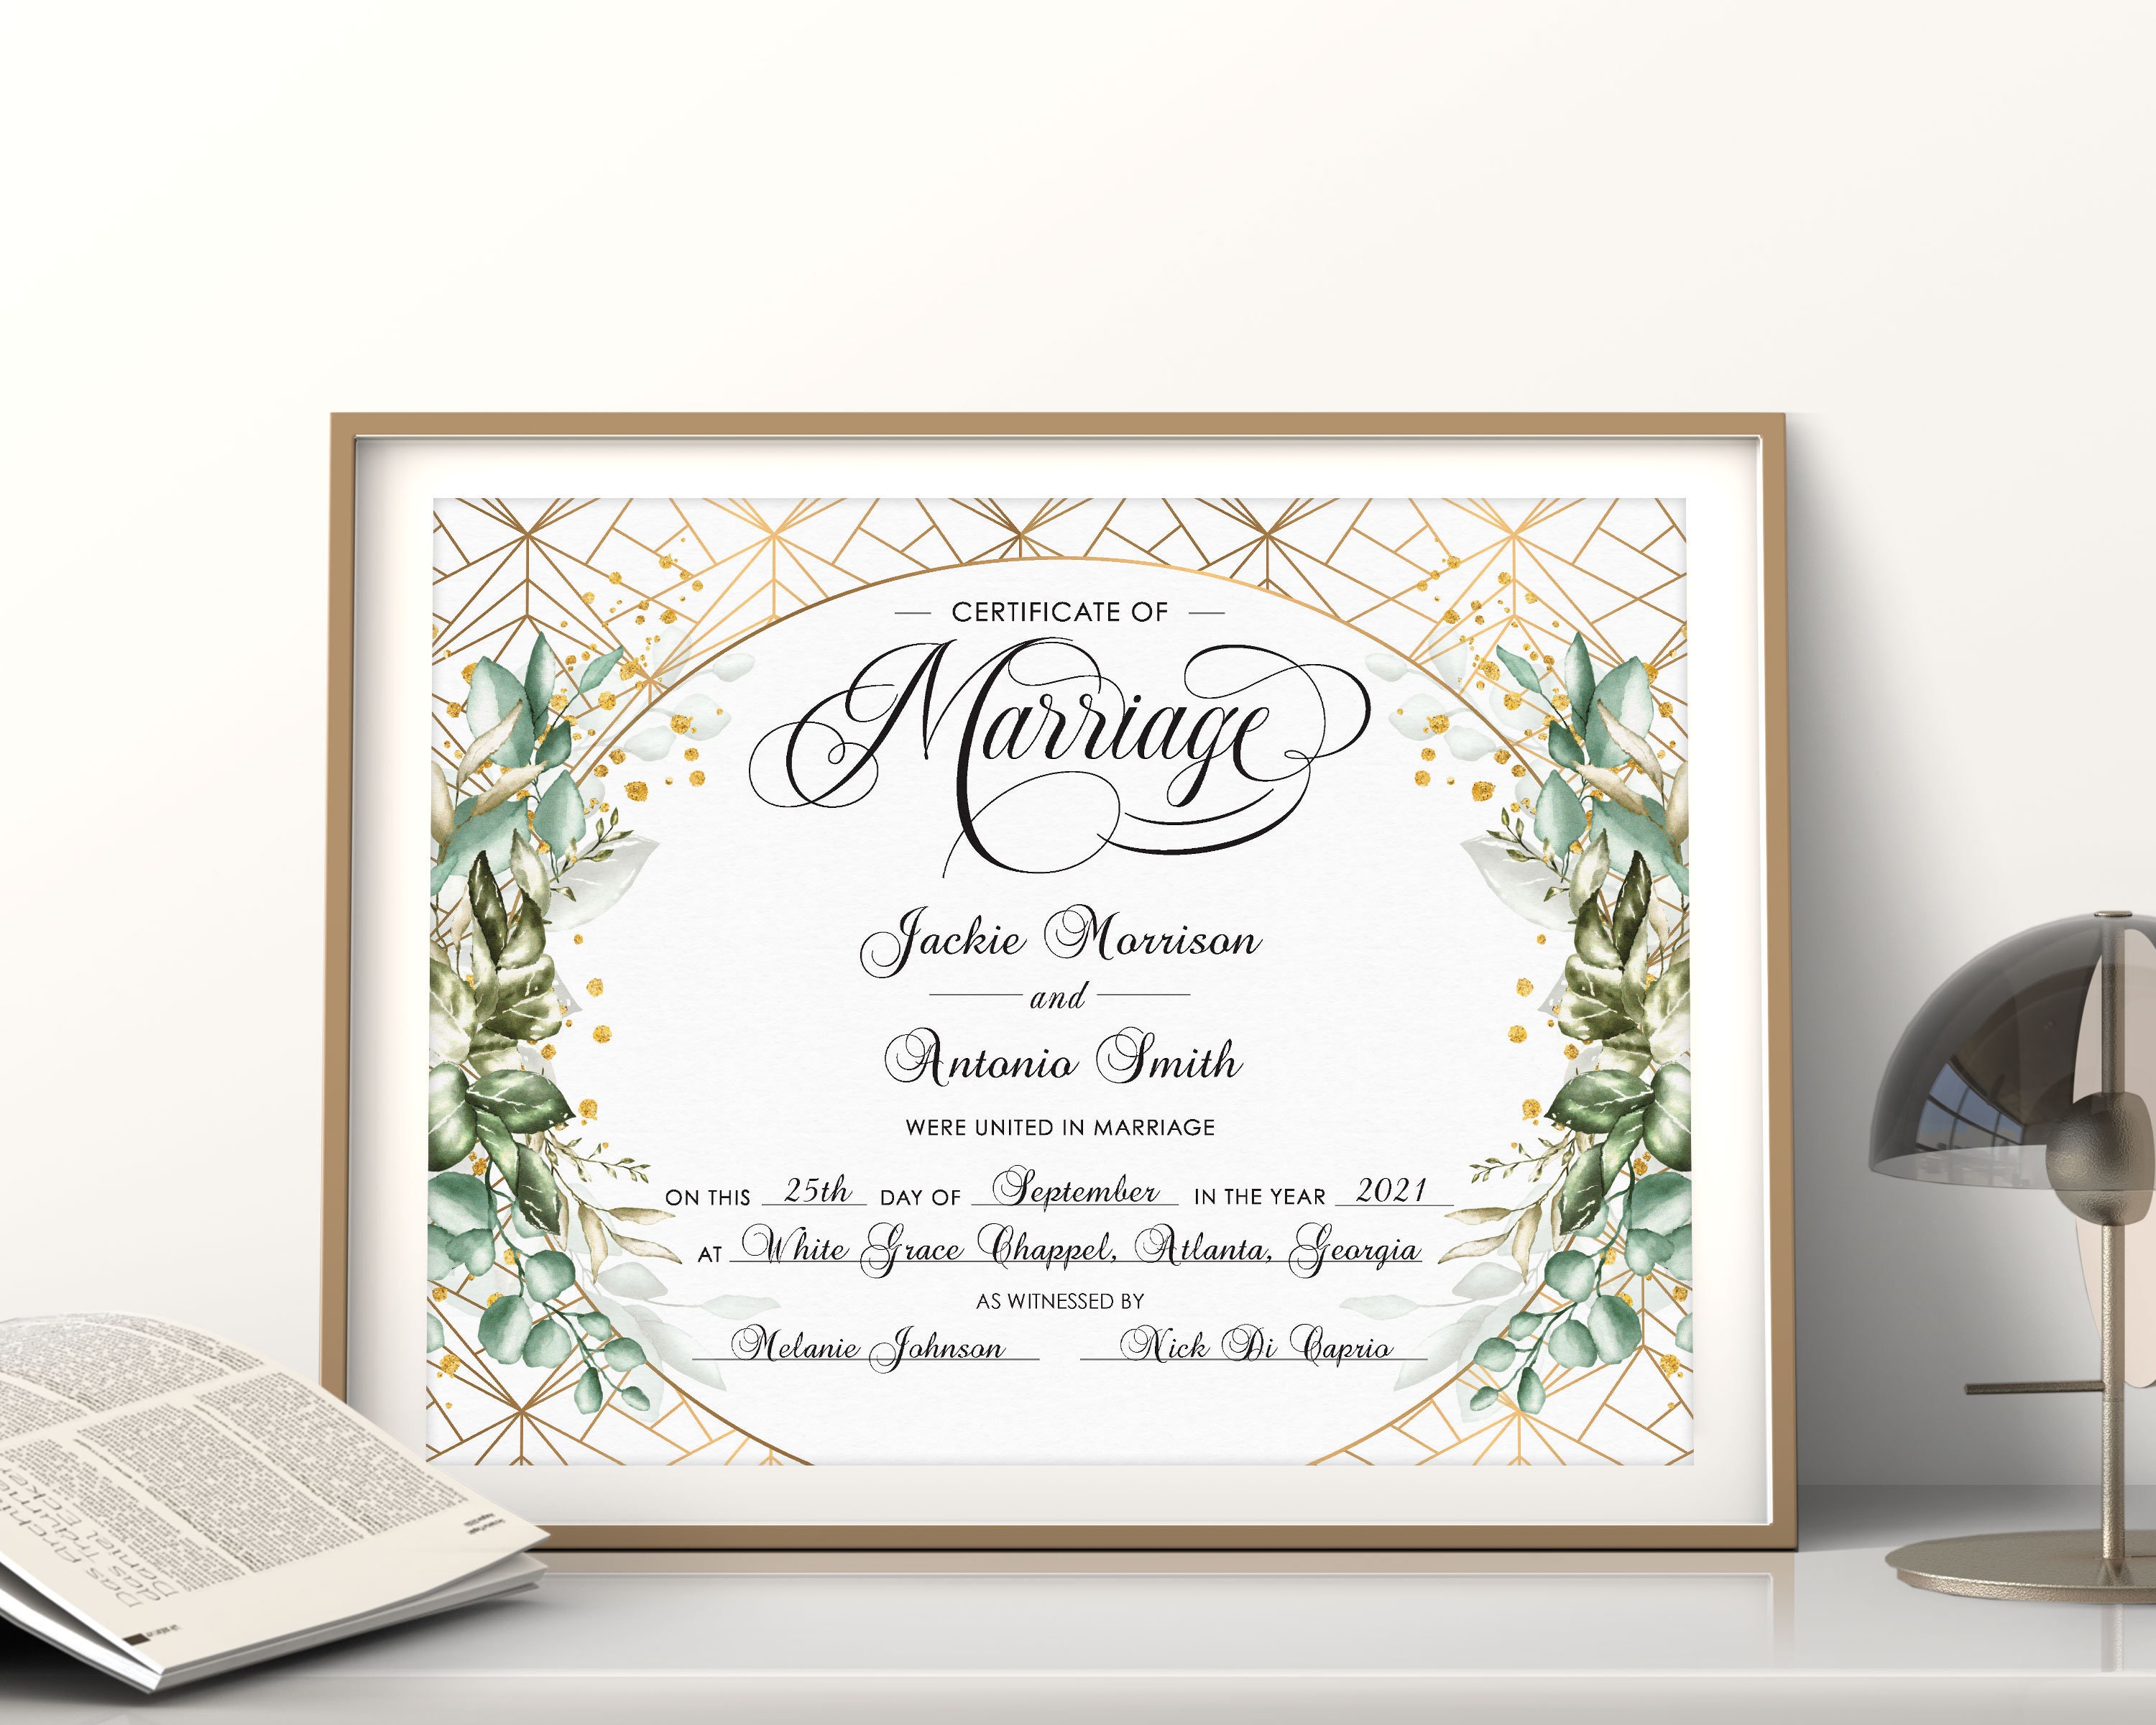 Modern Wedding Certificate, Printable Certificate of Marriage, Editable  Template, Wedding Gift, Luxury Certificate, Instant Download With Blank Marriage Certificate Template